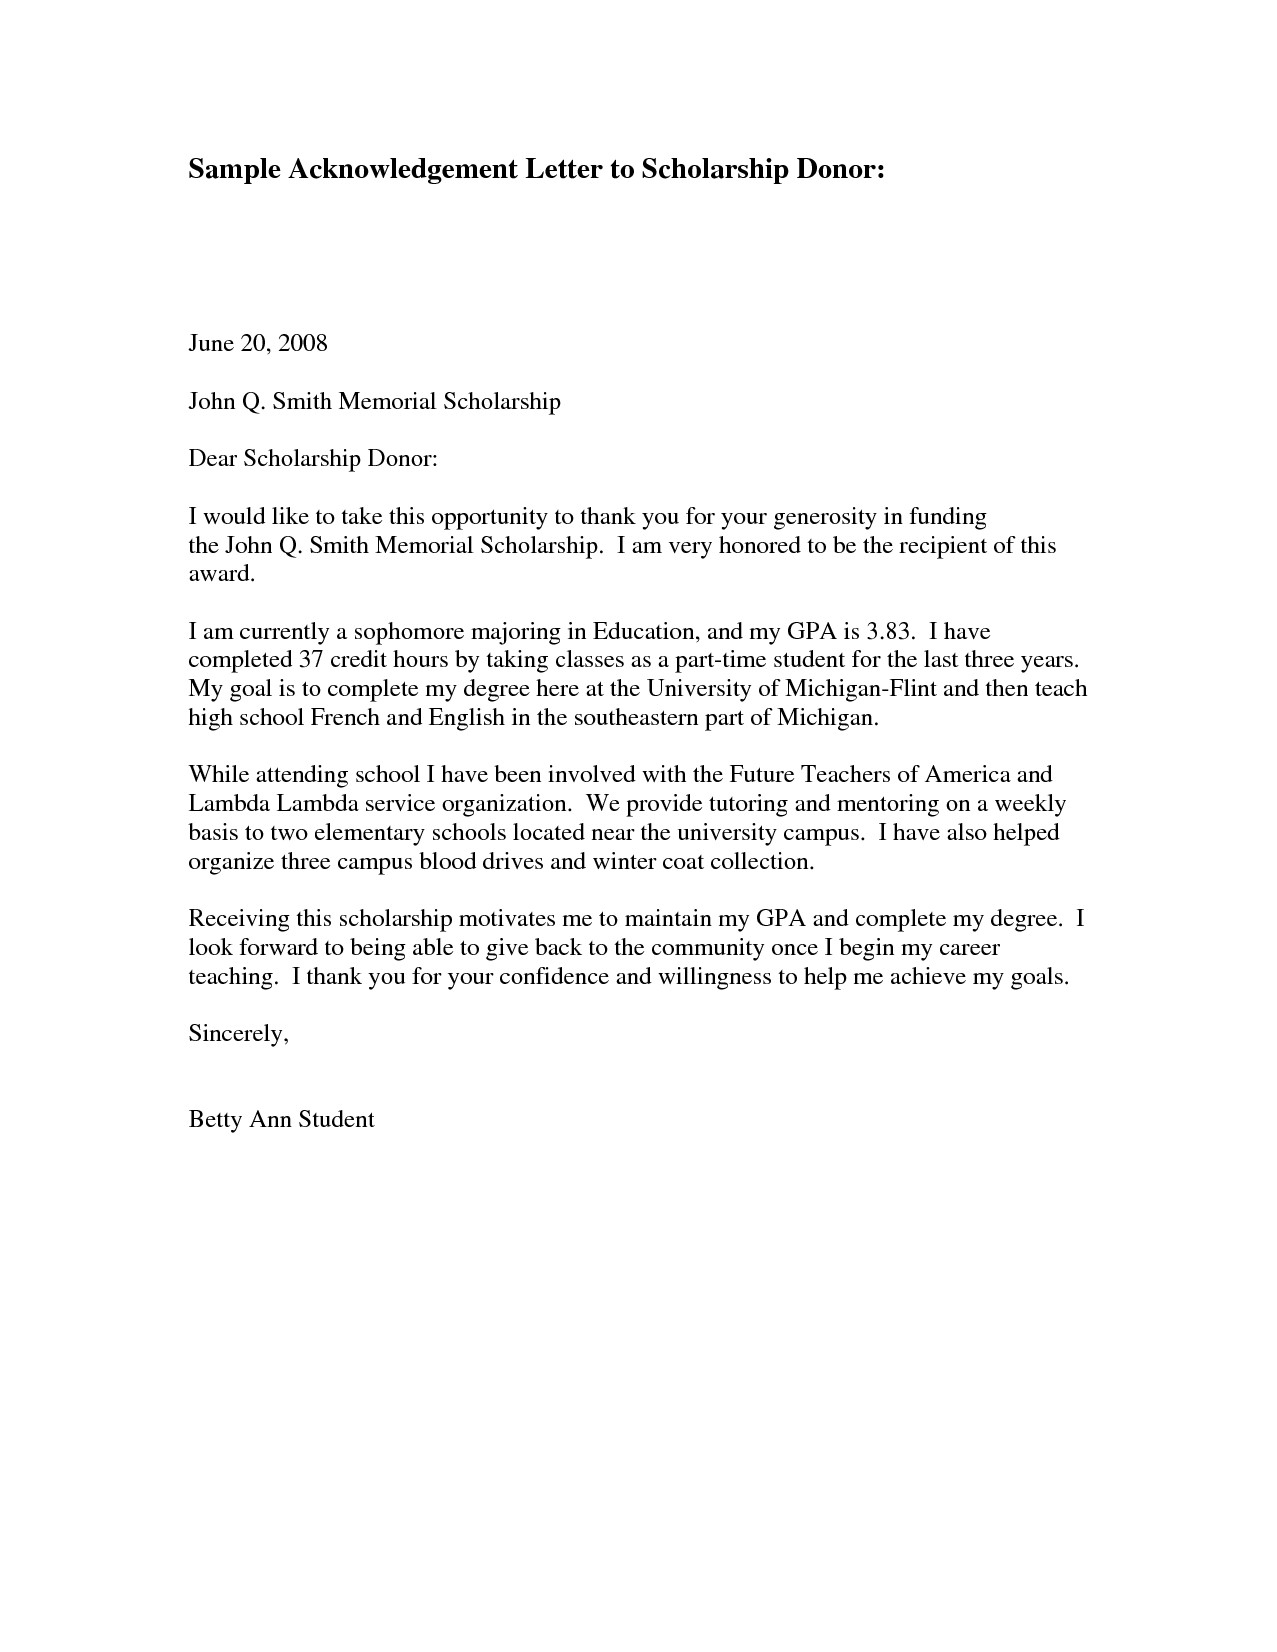 Scholarship Thank You Letter Template - Scholarship Thank You Letter Sample Http Jobsearch About Od